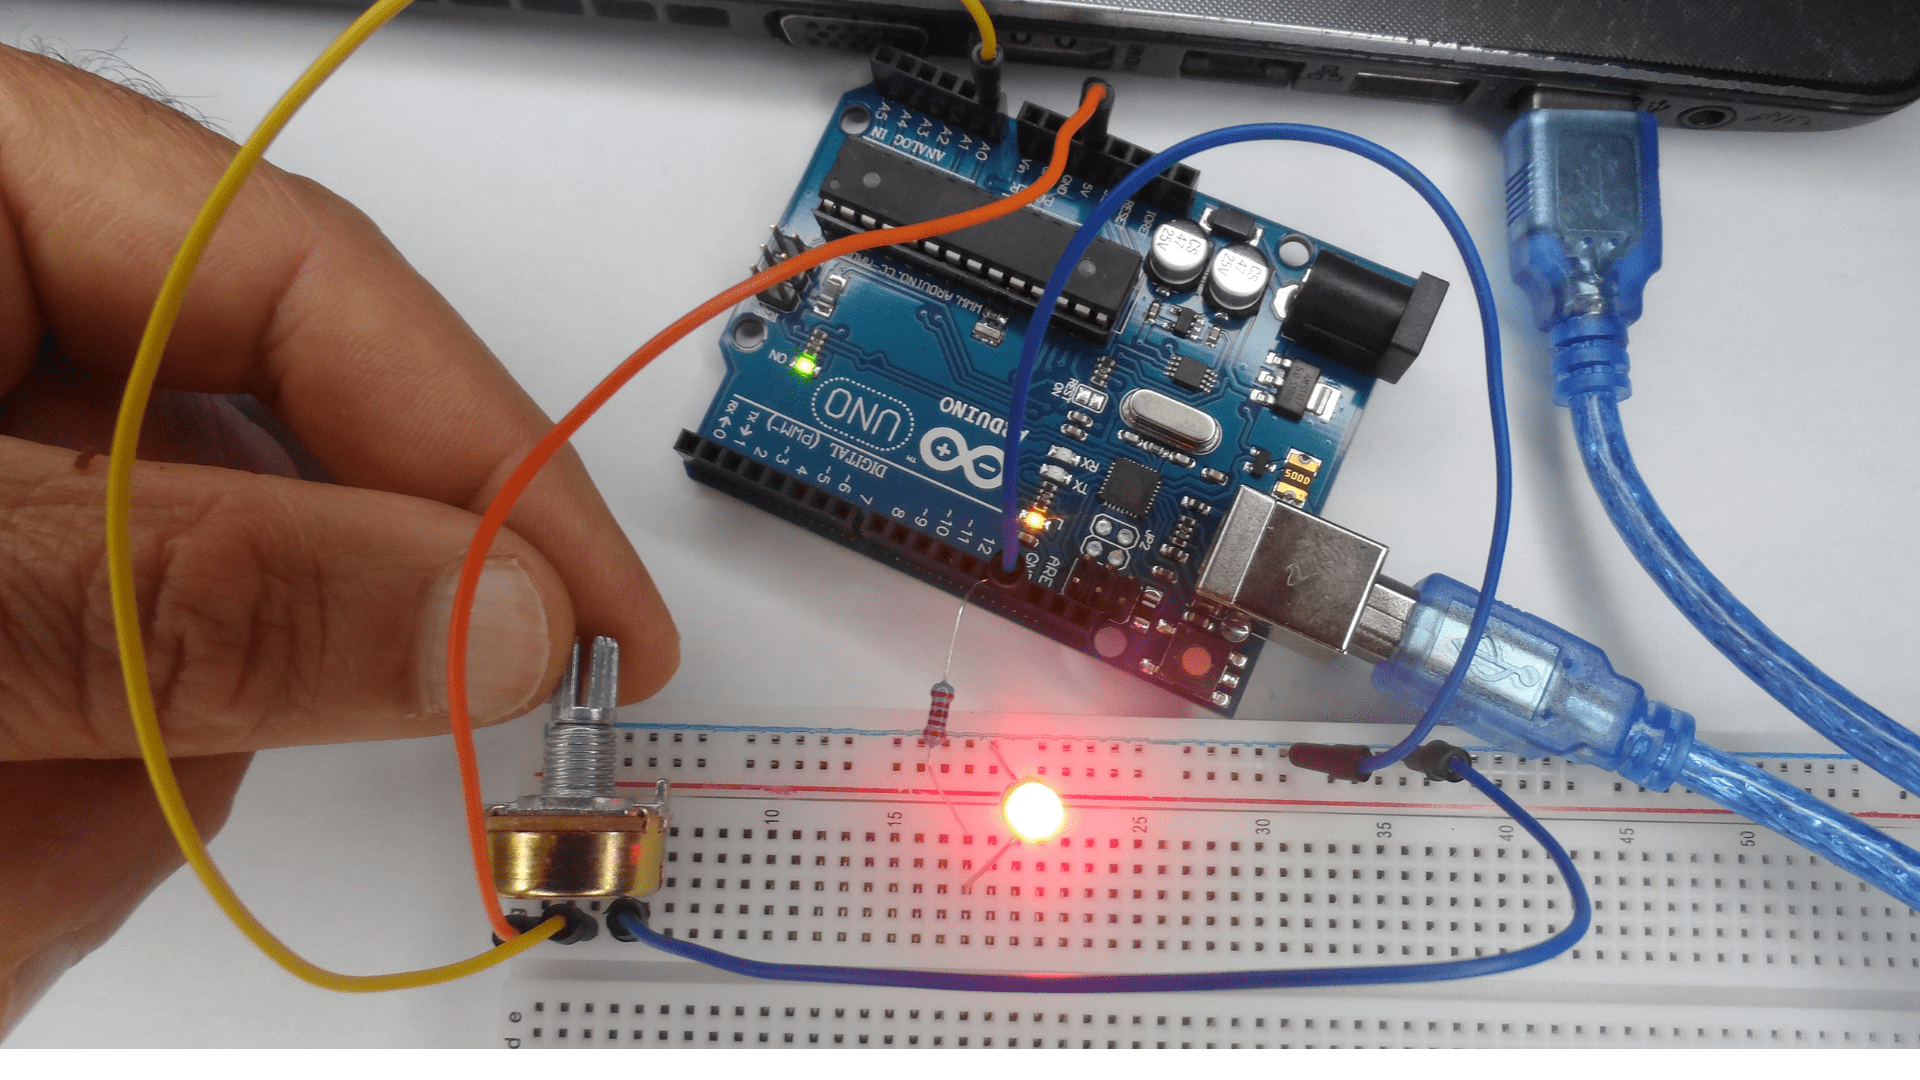 First Arduino Uno Starter Kit Project for Beginners